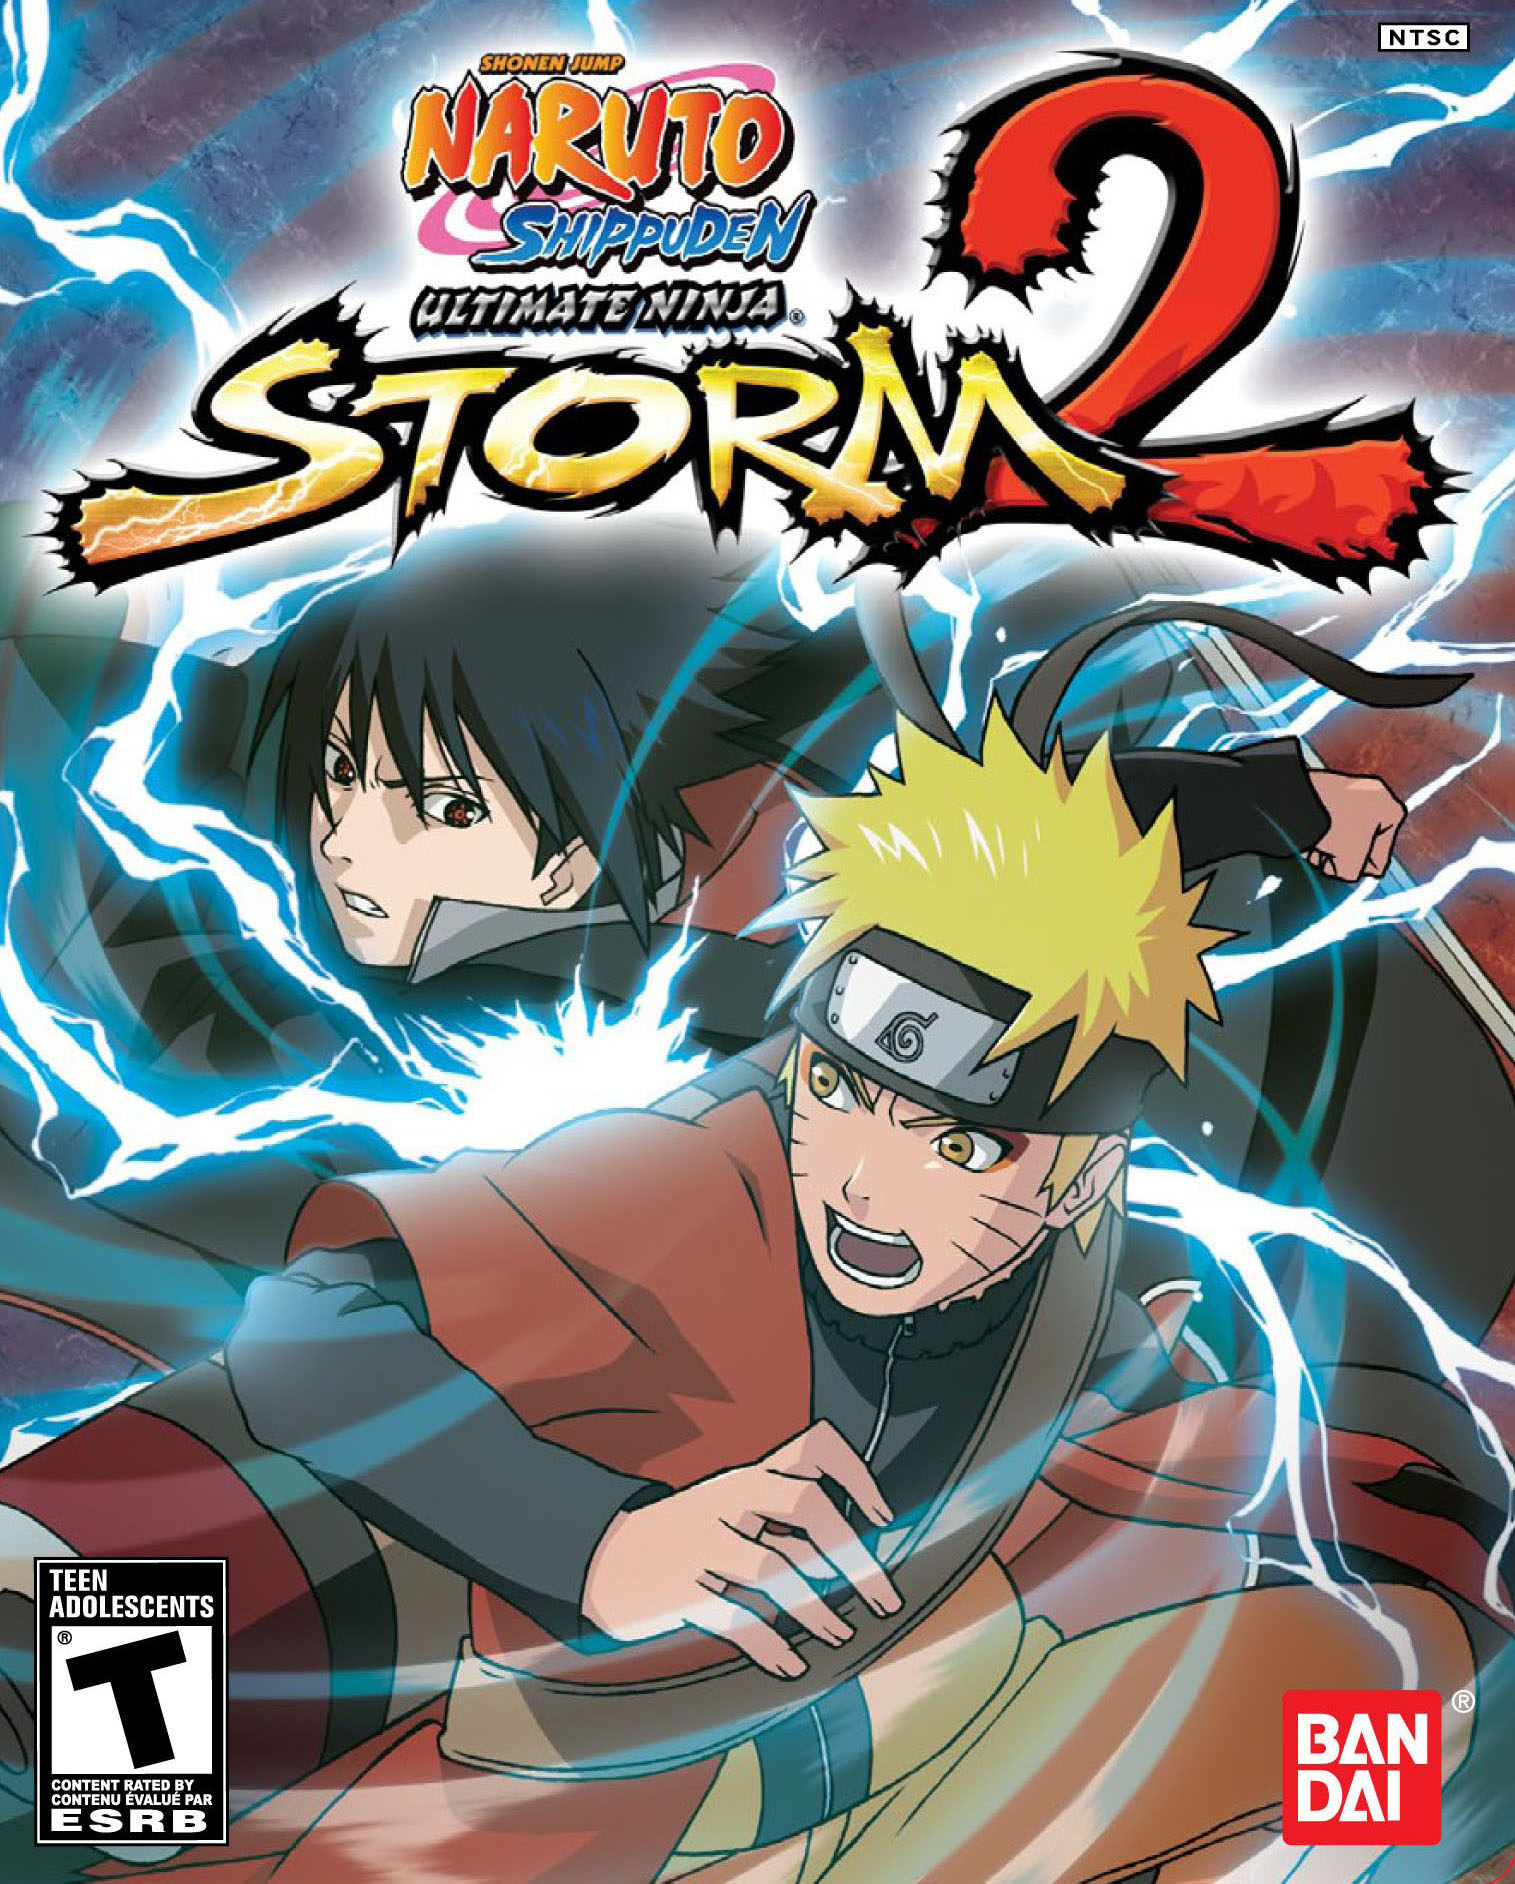 A blast from the past: Naruto Shippuden movie 4 – The Lost Tower